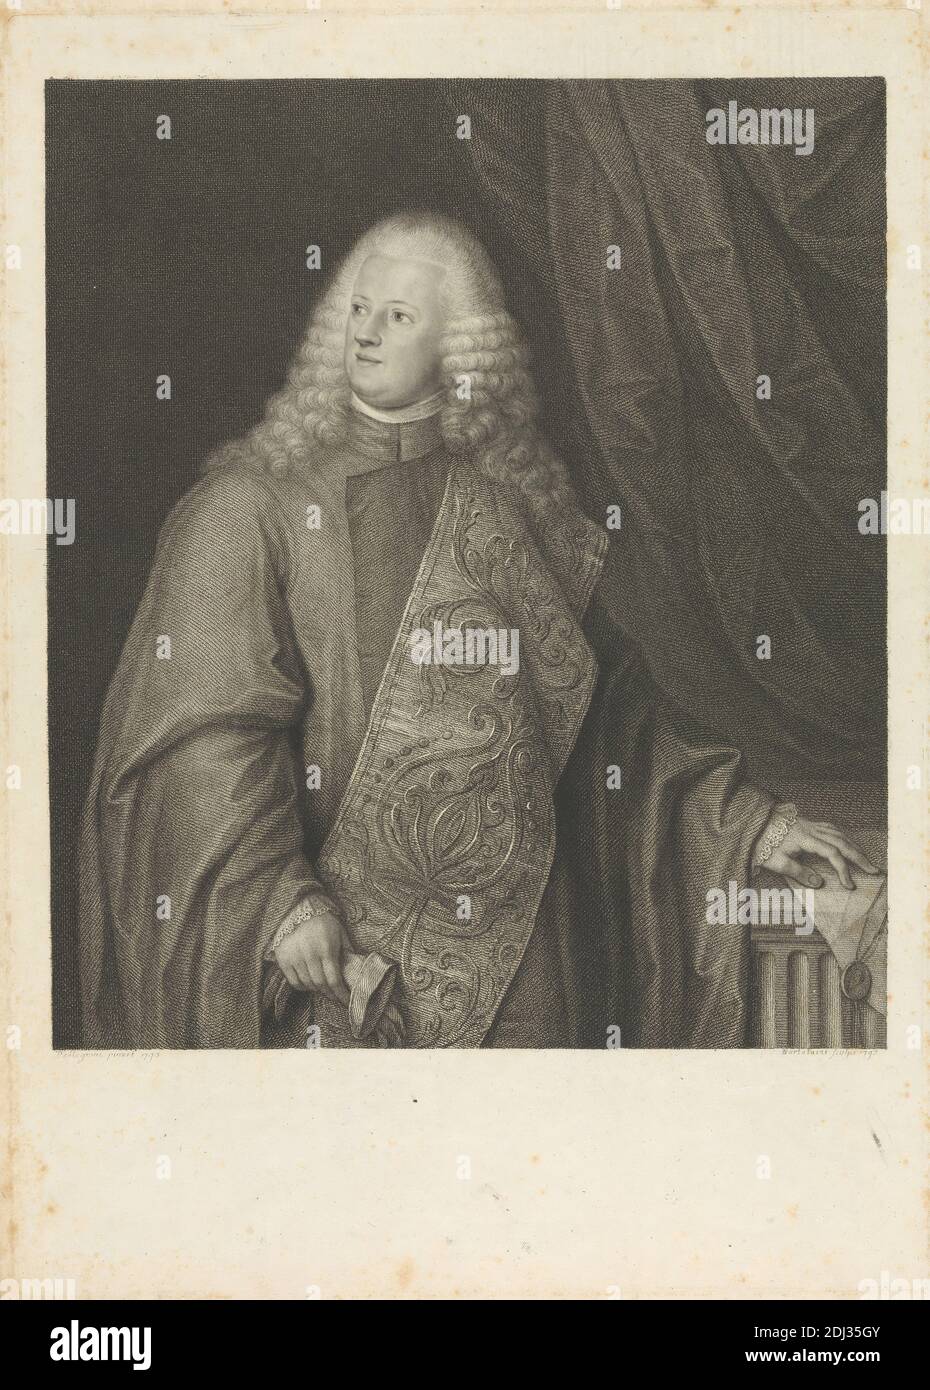 Alvise Pisani, Print made by Francesco Bartolozzi RA, 1728–1815, Italian, active in Britain (1764–99), after Domenico Pellegrini, 1759–1840, Italian, 1793, Mezzotint and etching on moderately thick, moderately textured, cream laid paper, Sheet: 17 3/8 x 12 3/8 inches (44.1 x 31.5 cm), Plate: 16 3/4 x 11 15/16 inches (42.6 x 30.3 cm), and Image: 12 11/16 x 10 7/8 inches (32.3 x 27.7 cm), costume, curls, curtain, doge, drapery, glove, interior, man, nobility, pattern (design element), pendant, politician, portrait, sash, wig Stock Photo